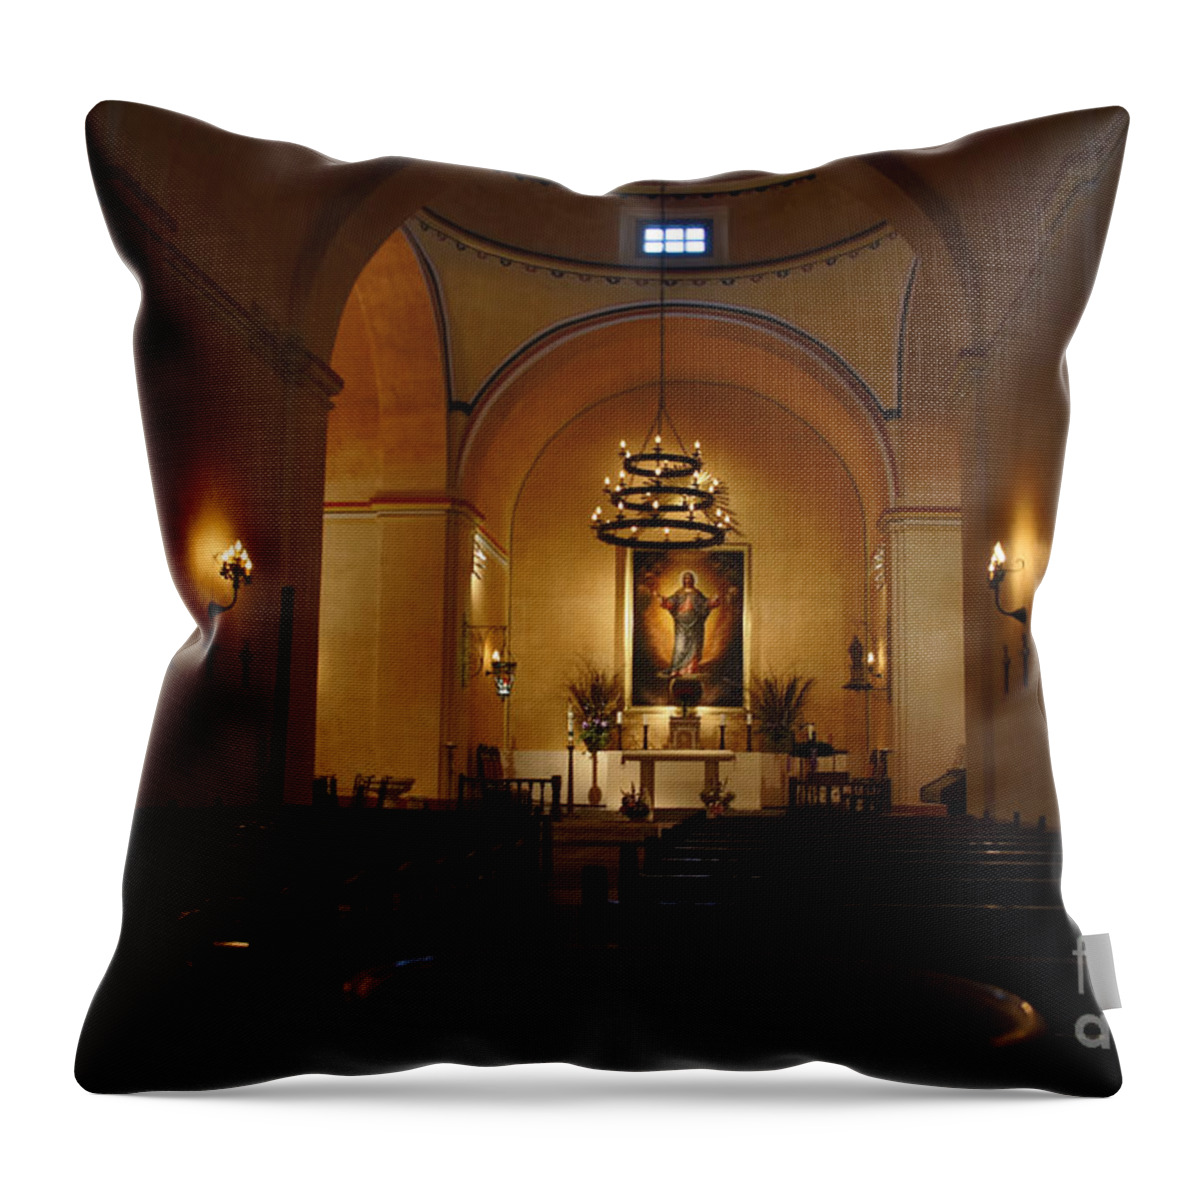 Main Church Hall Throw Pillow featuring the photograph Mission Concepcion. Hall. by Elena Perelman